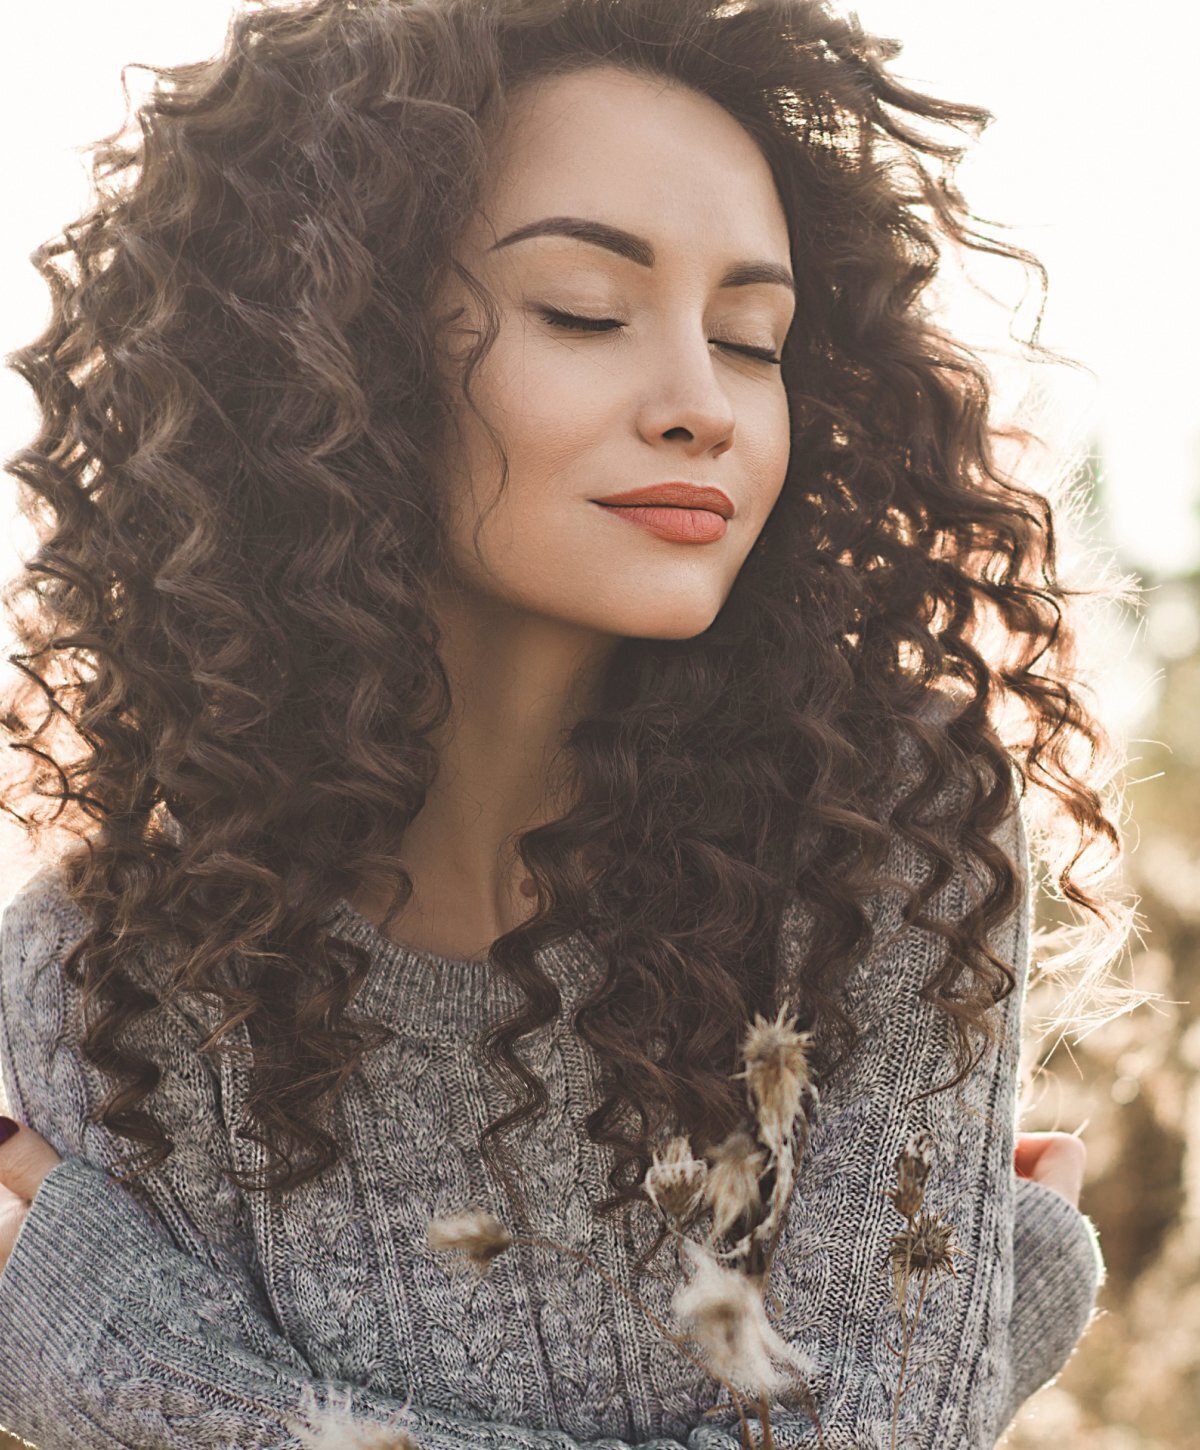 Grand Rapids Juvéderm Volux patient model with curly hair